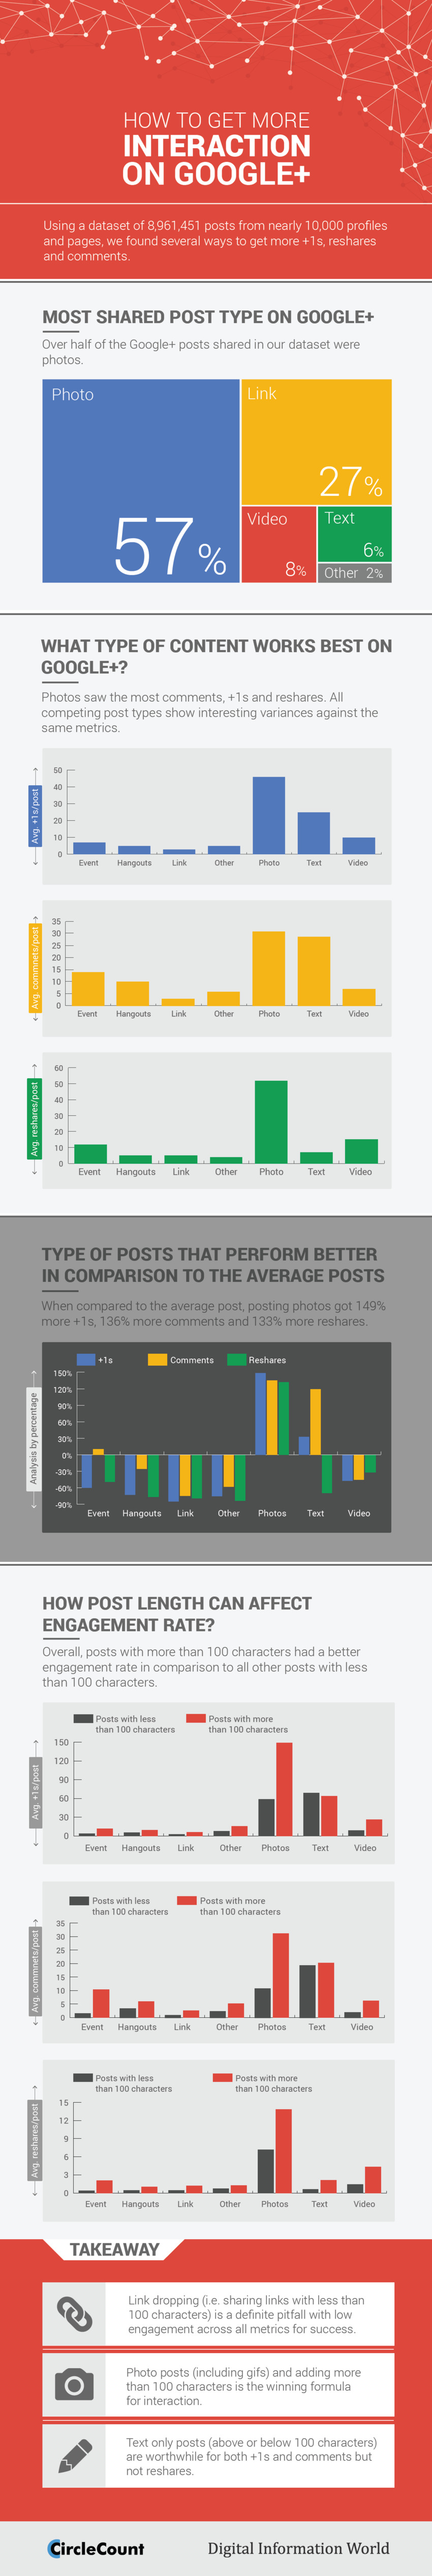 Infographic: How to get more interactions on Google+ - The Hub | The MarTech Digest | Scoop.it